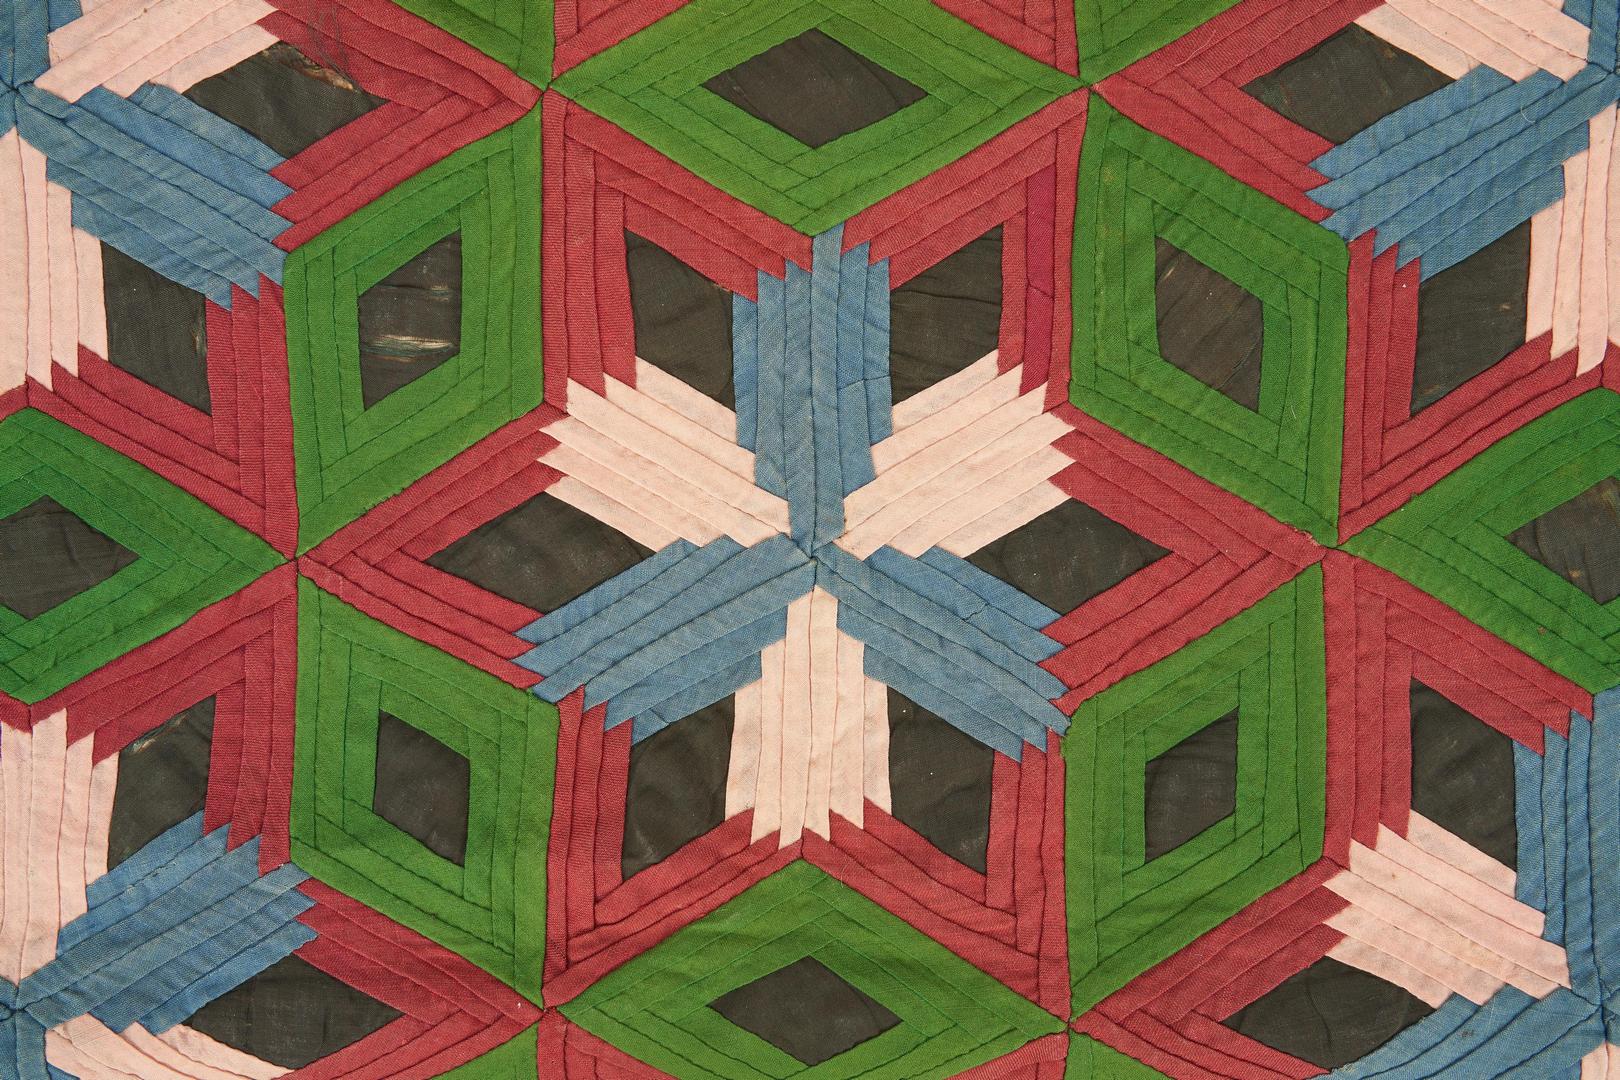 Lot 865: American Wool & Cotton Quilt, Pineapple variant